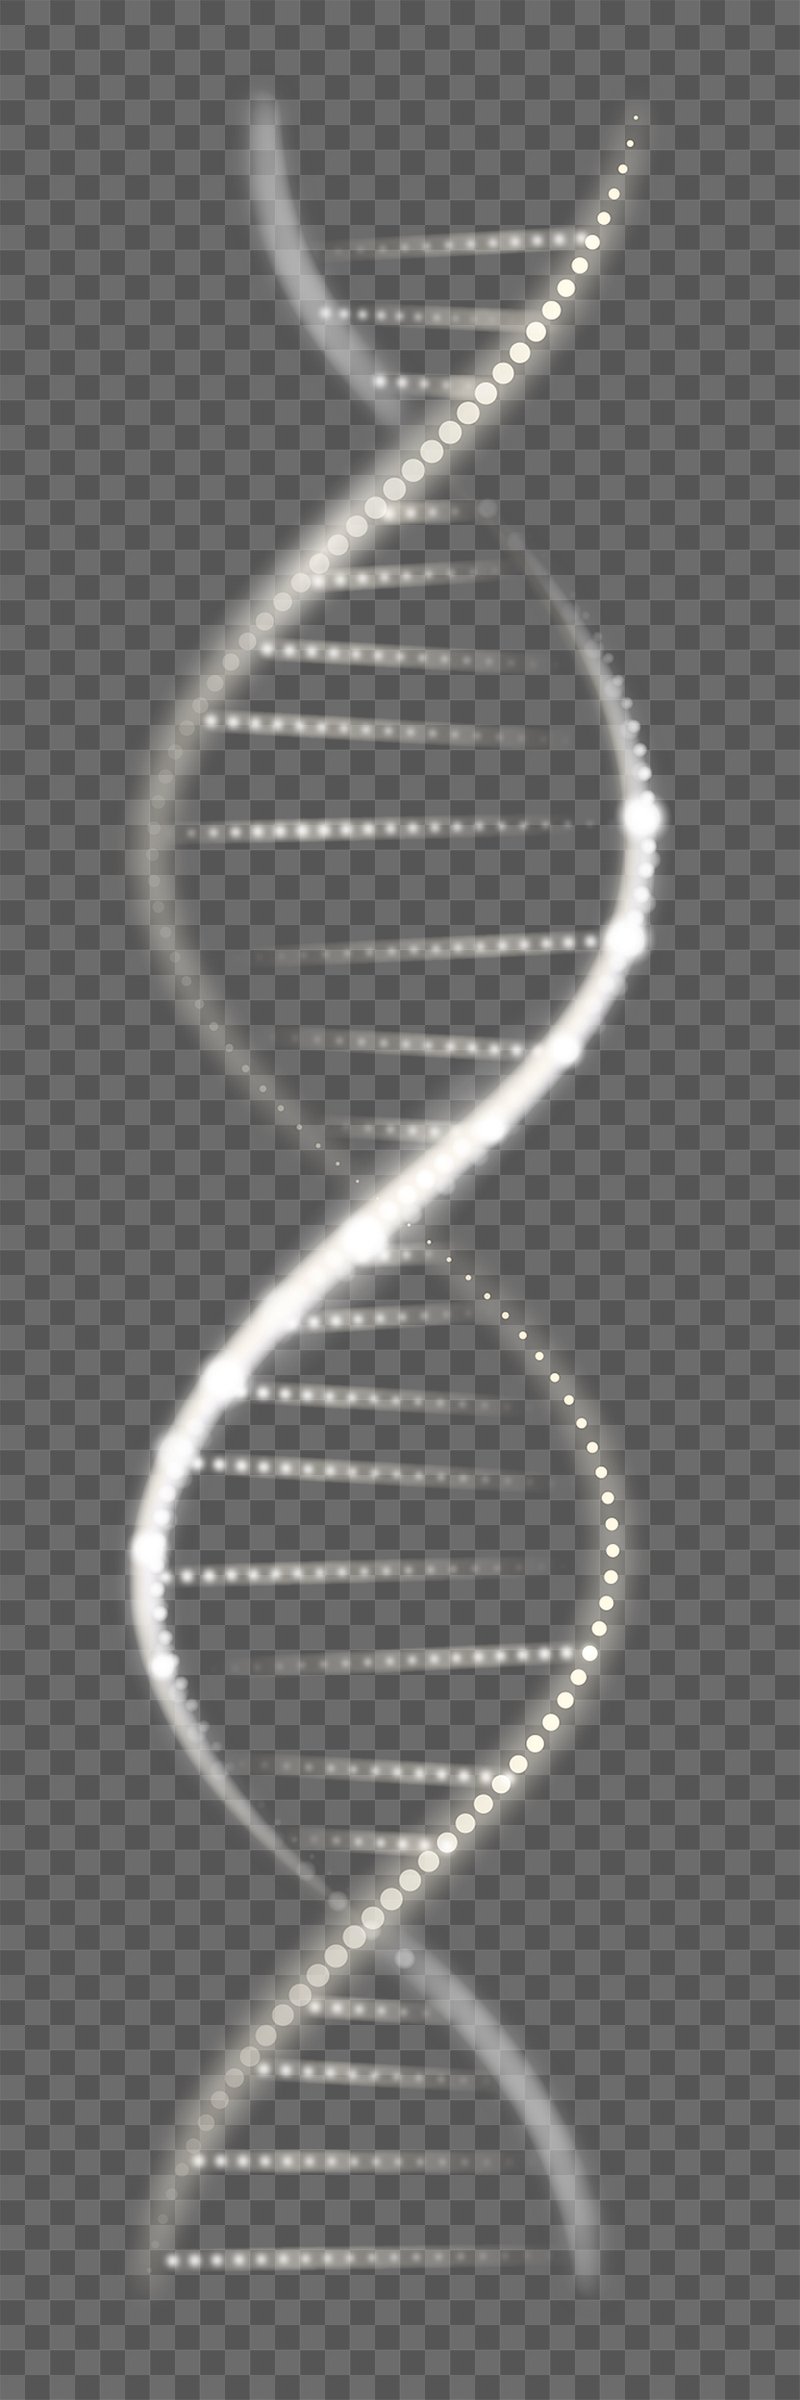 Dna Png Images Free Photos Png Stickers Wallpapers Backgrounds Rawpixel